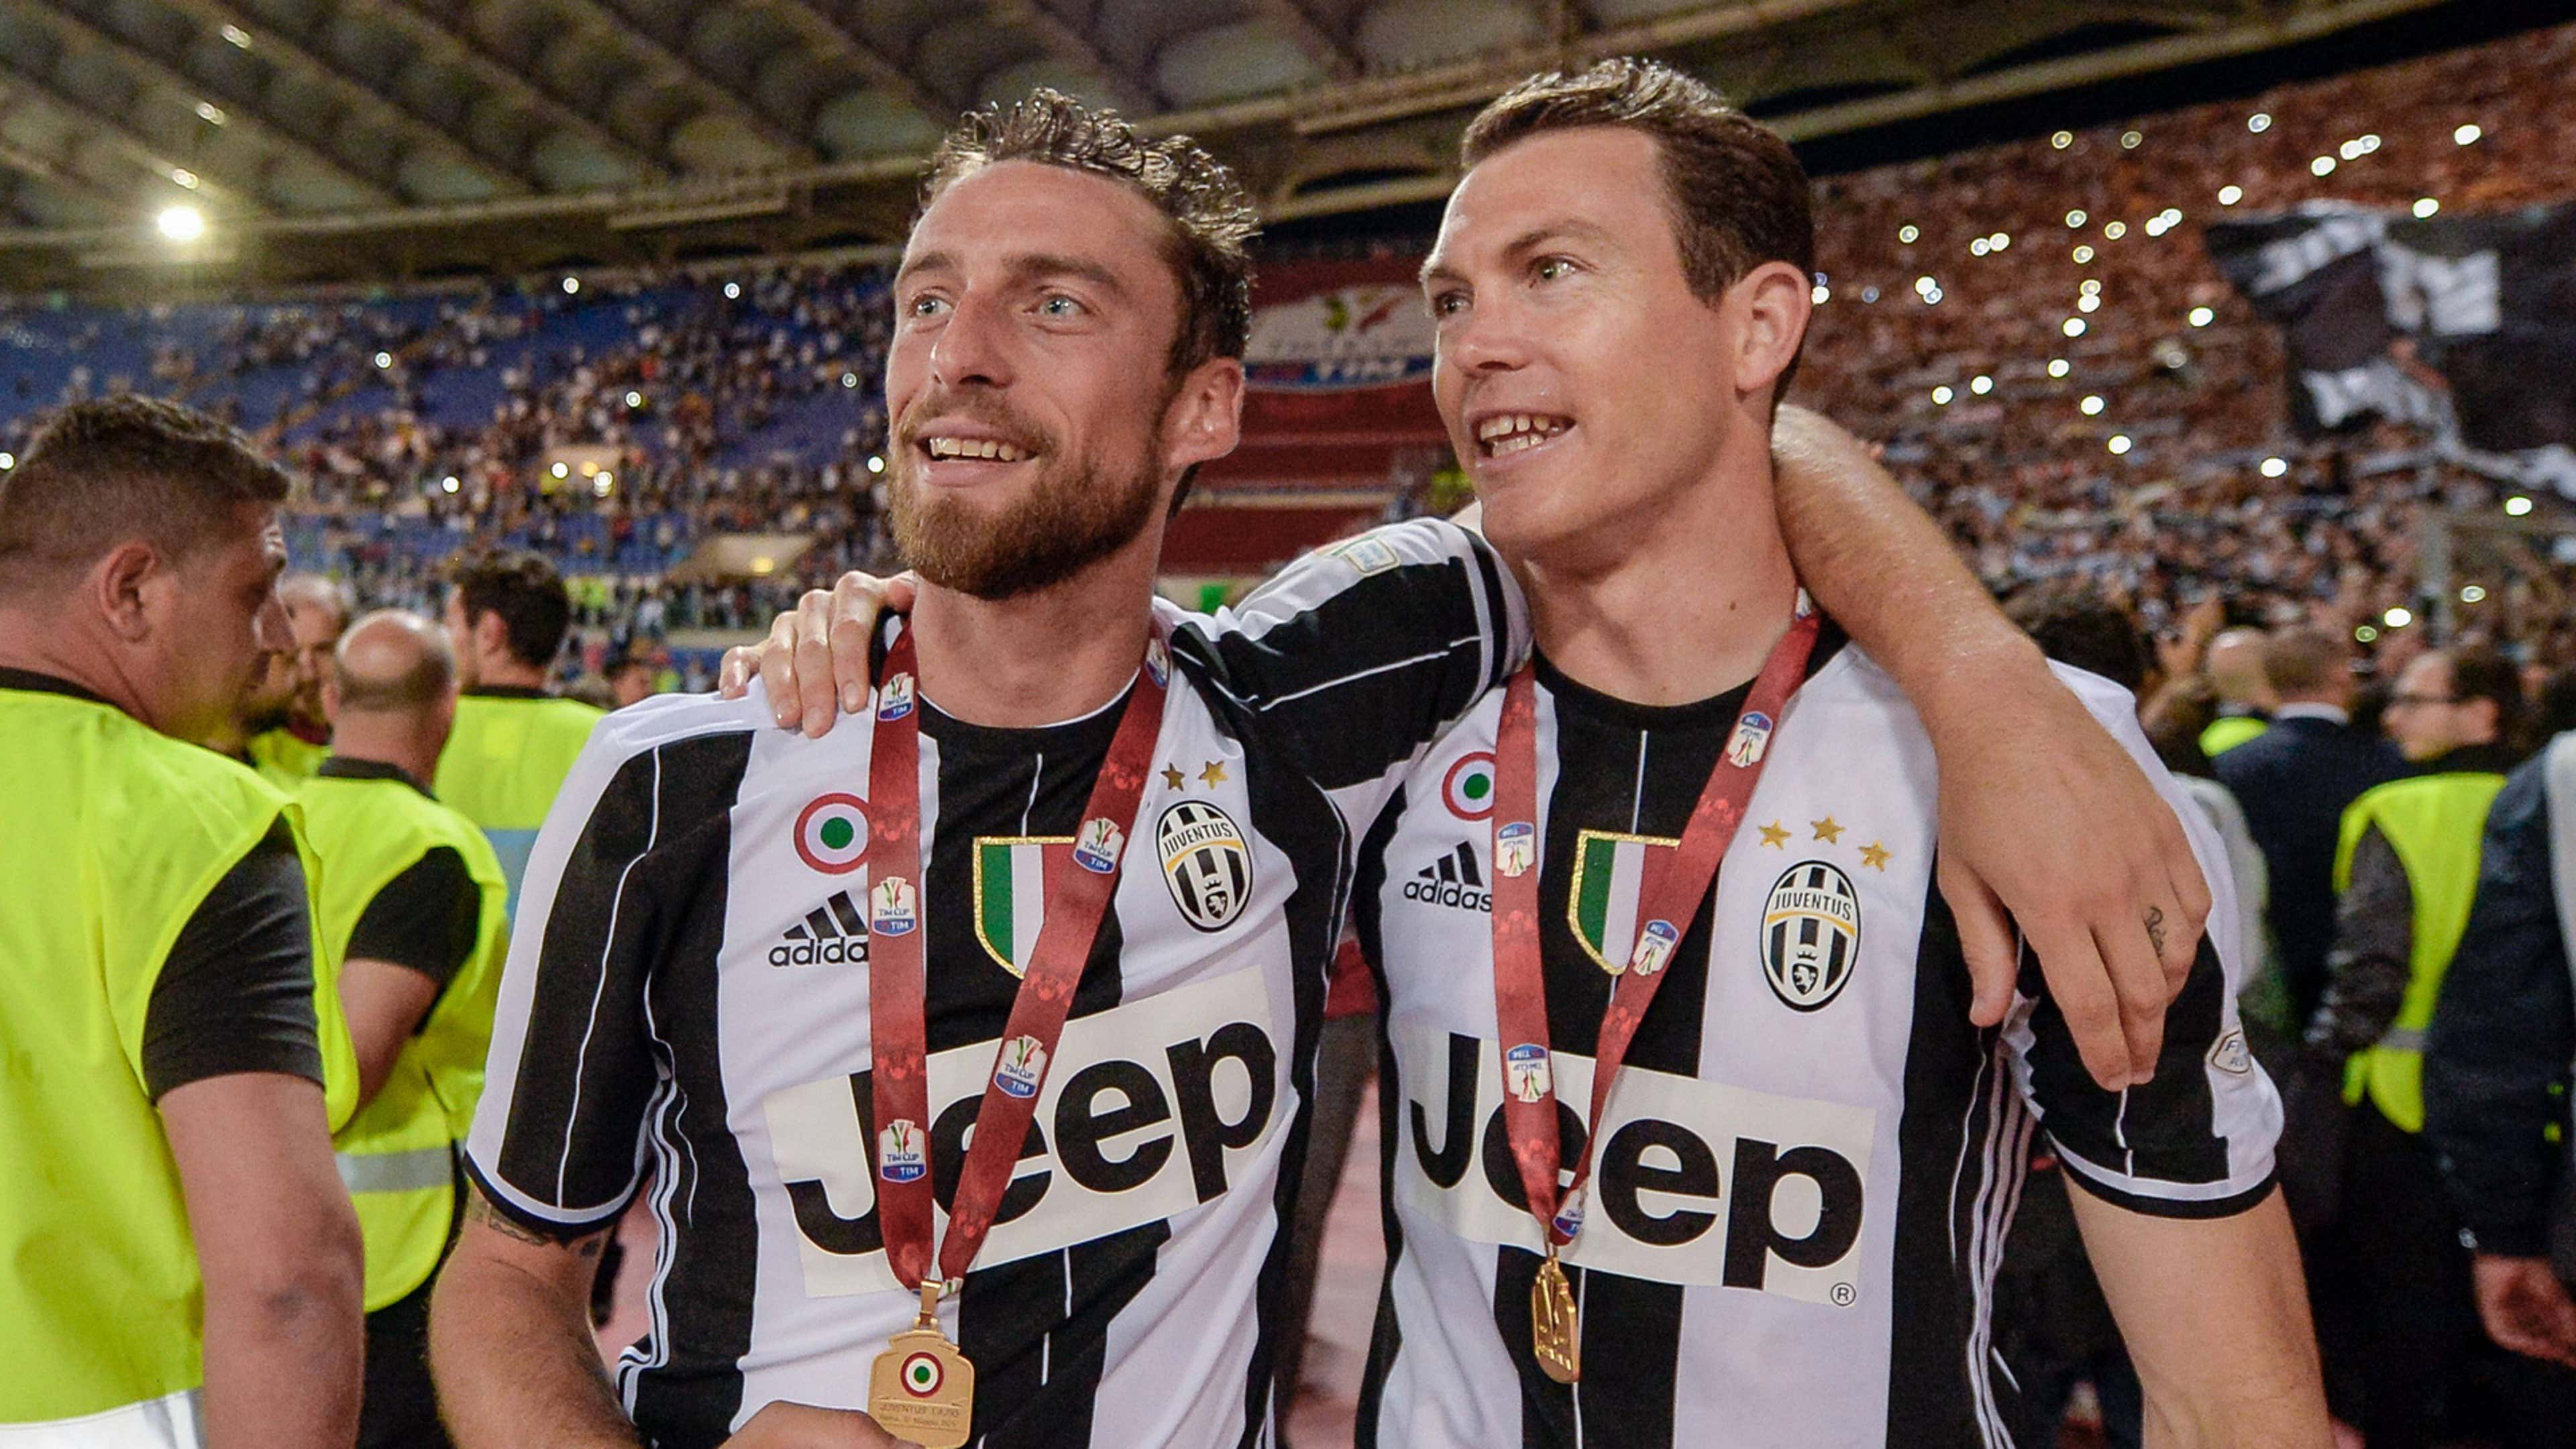 GERMANY ONLY Marchisio Lichtsteiner Juventus